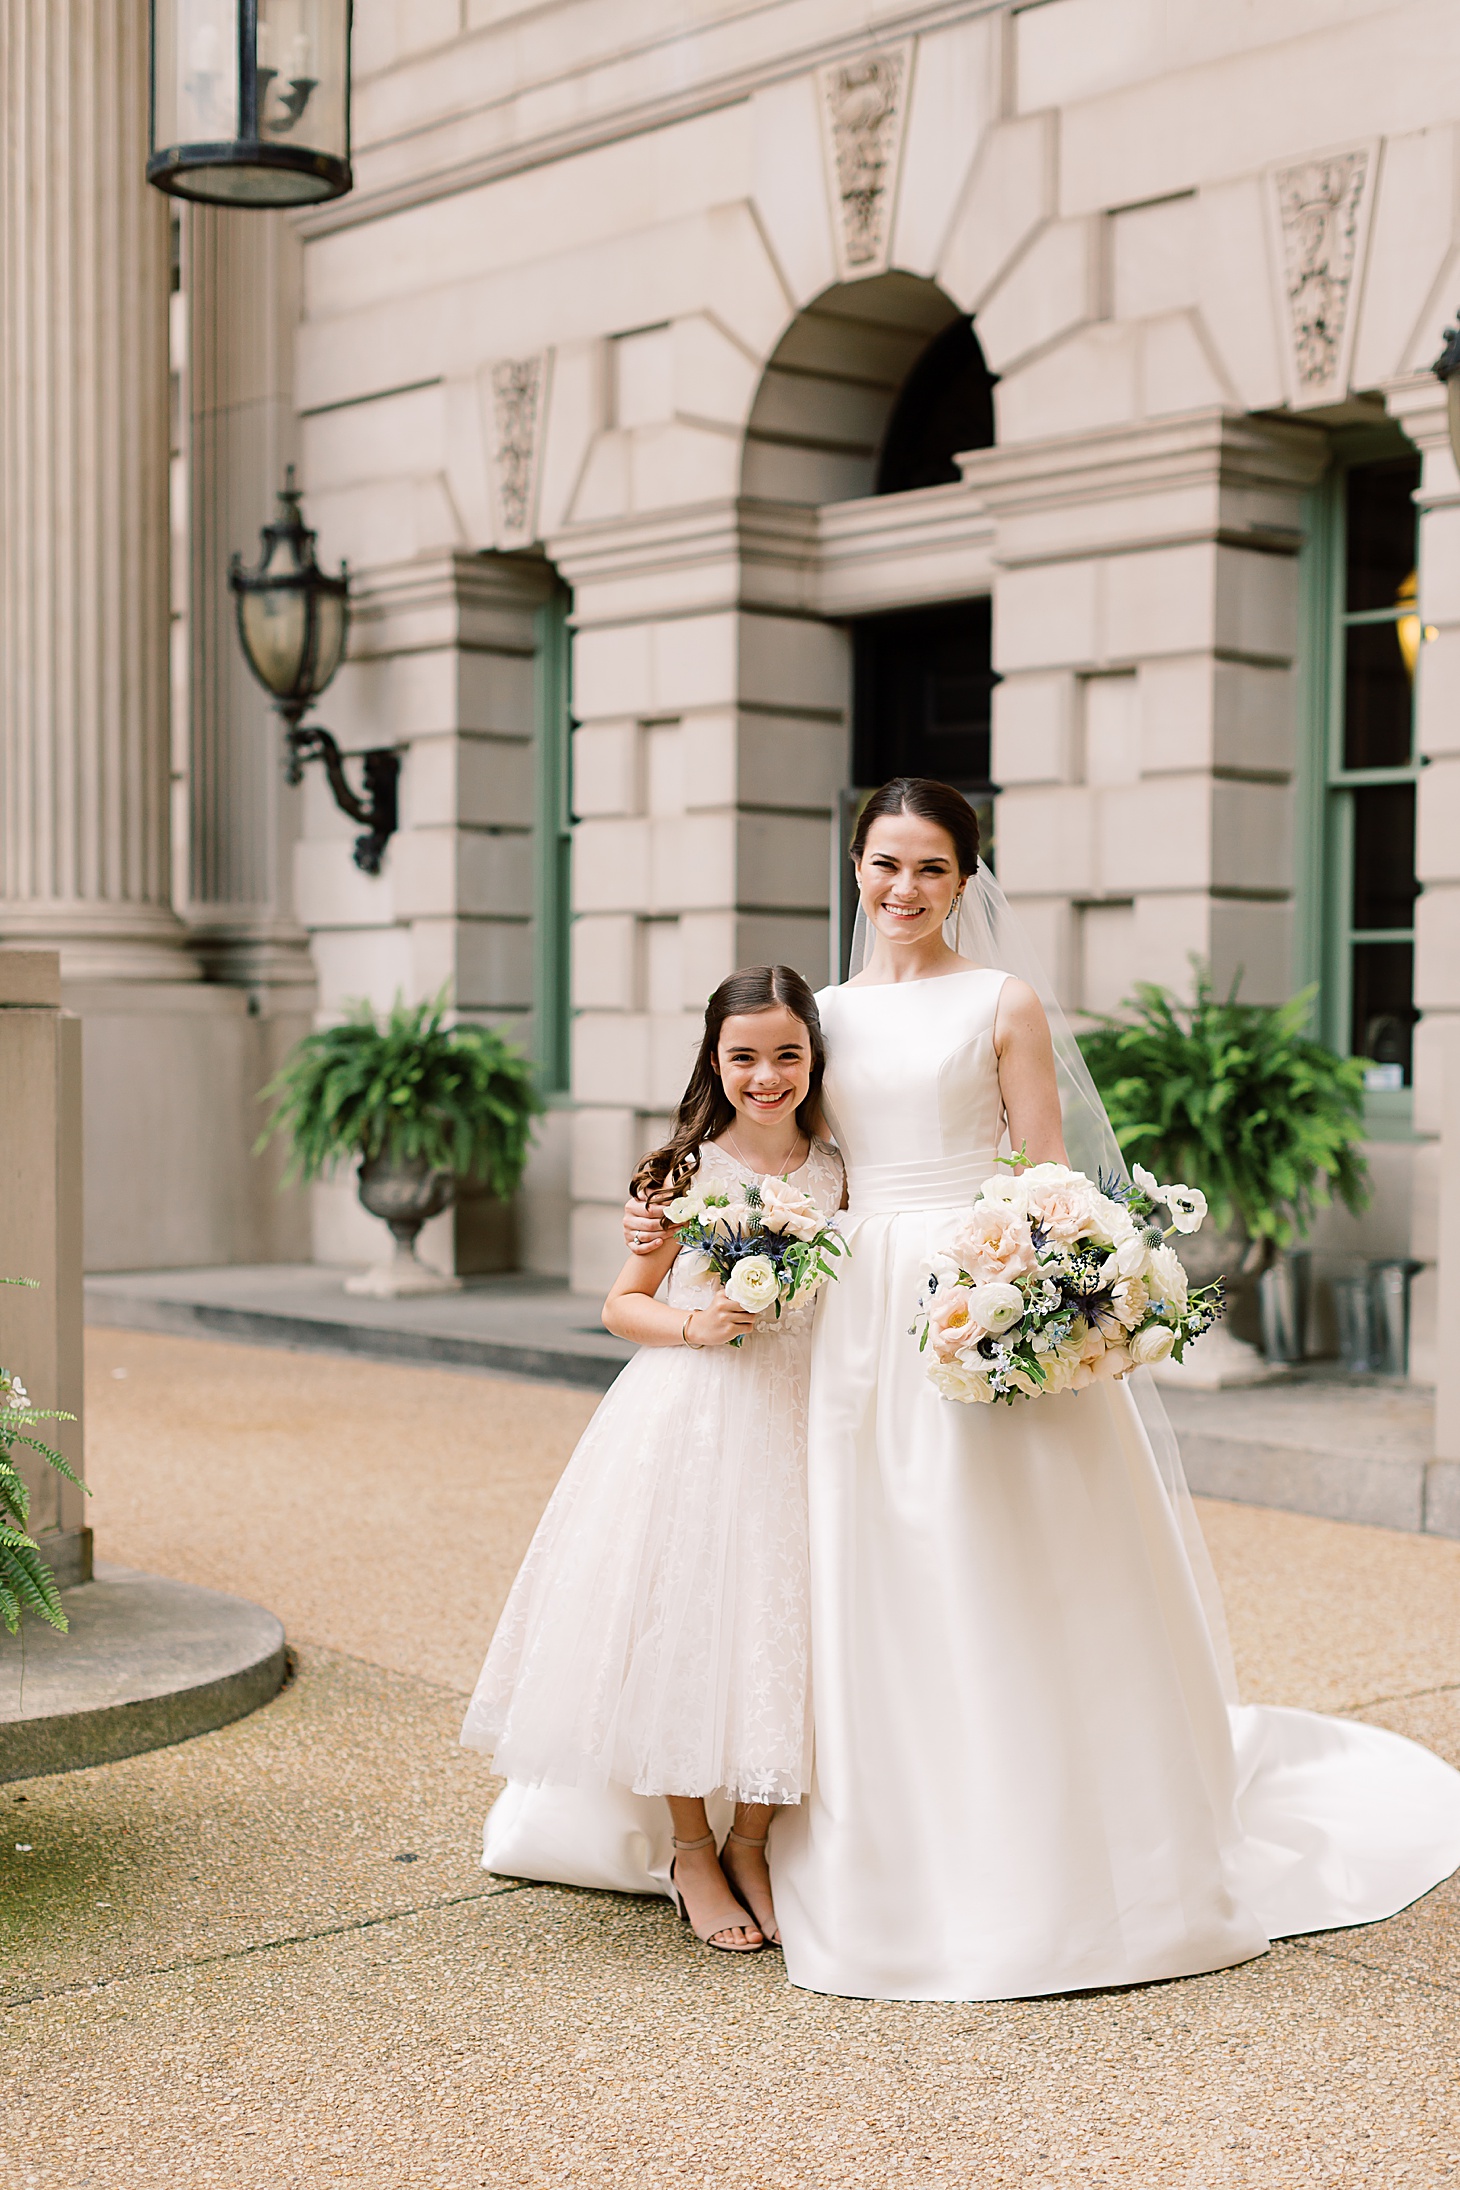 Bride & flower girl at Anderson House Wedding by Sarah Bradshaw